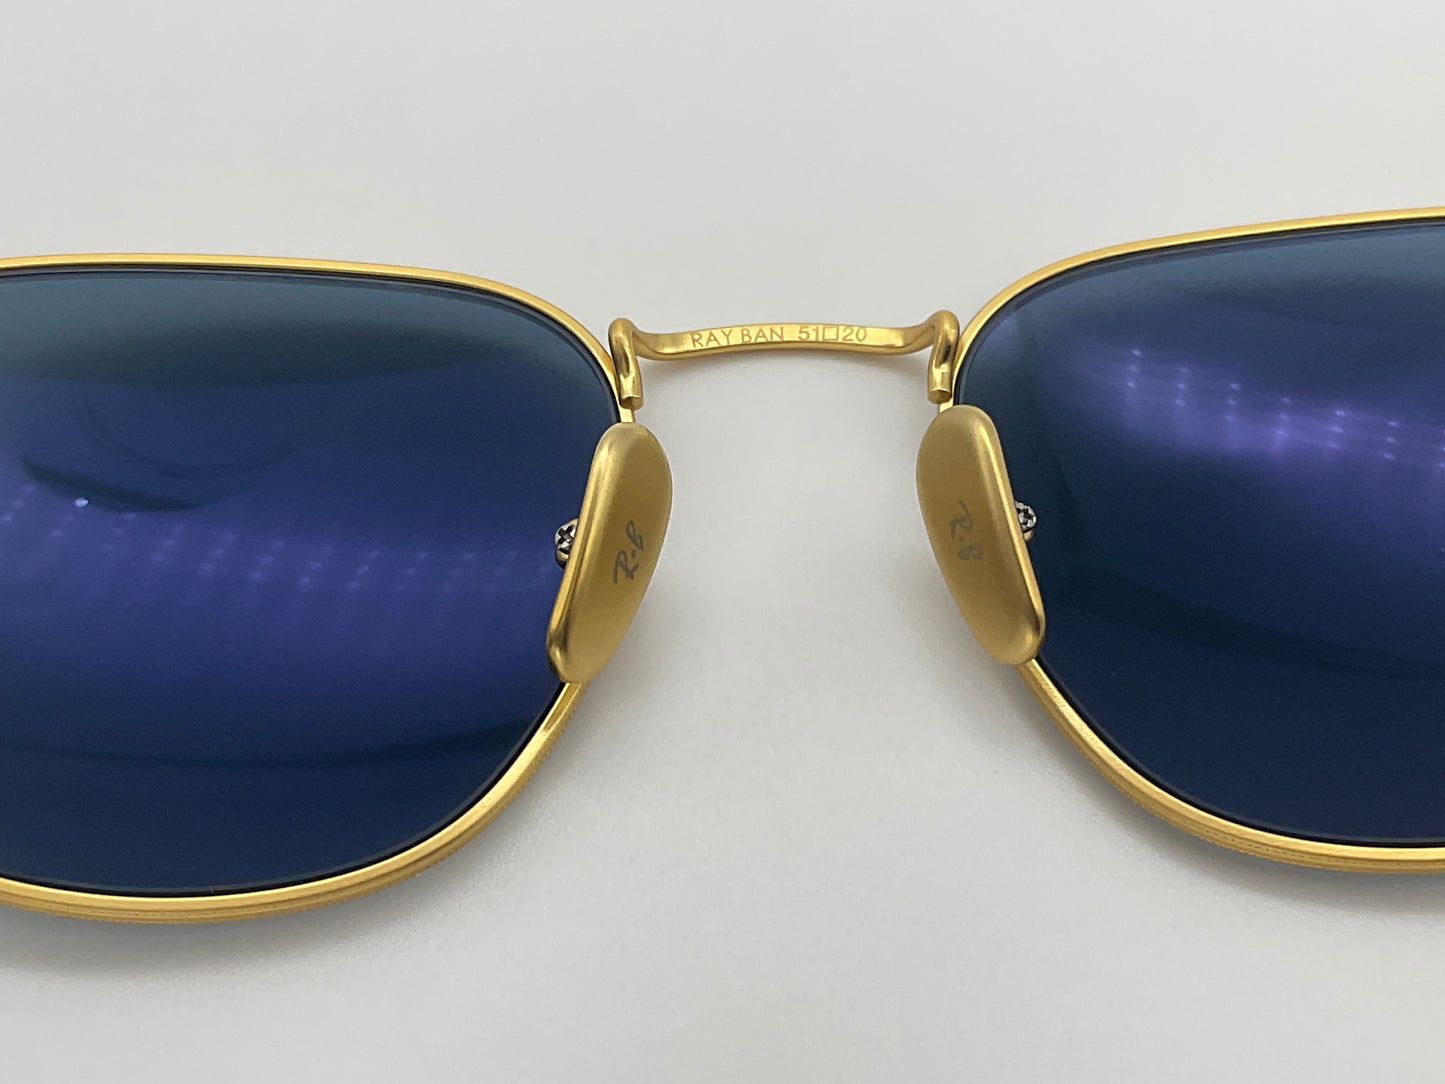 Ray Ban Frank Titanium RB 8157 Gold Blue Polarized 9217TO 51mm Gold.